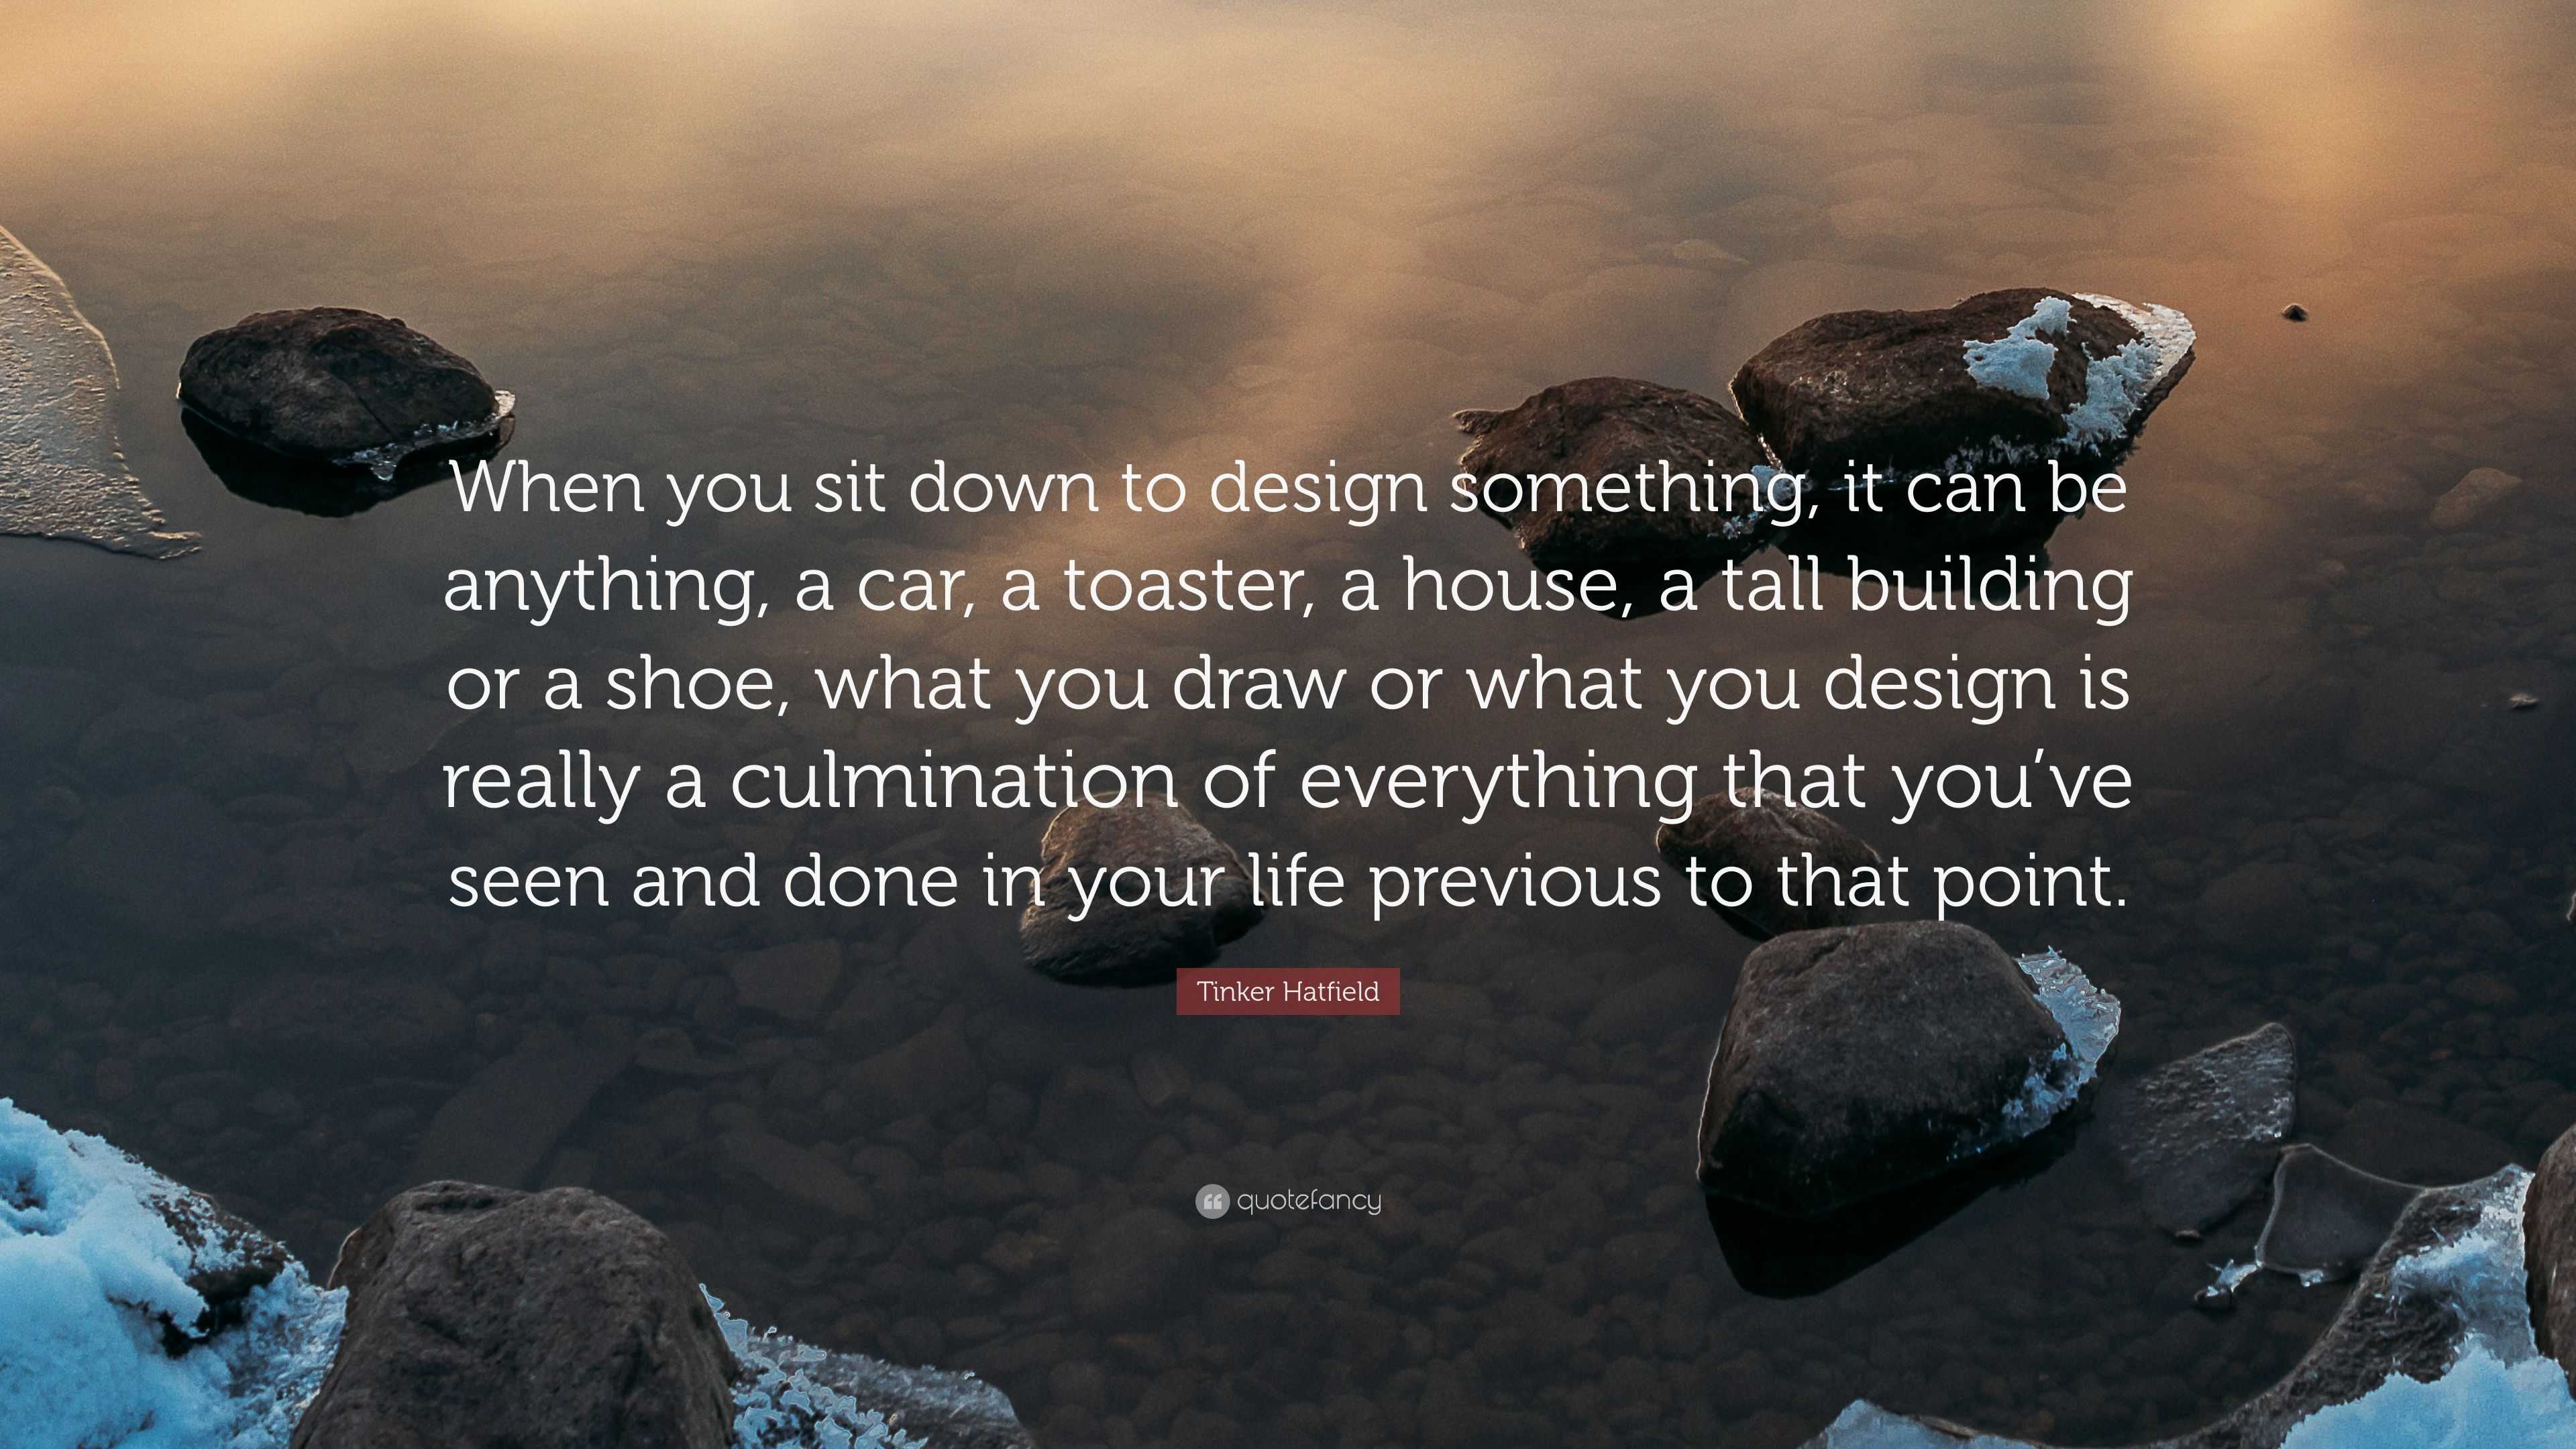 Tinker Hatfield Quote: “When you sit down to design something, it can ...